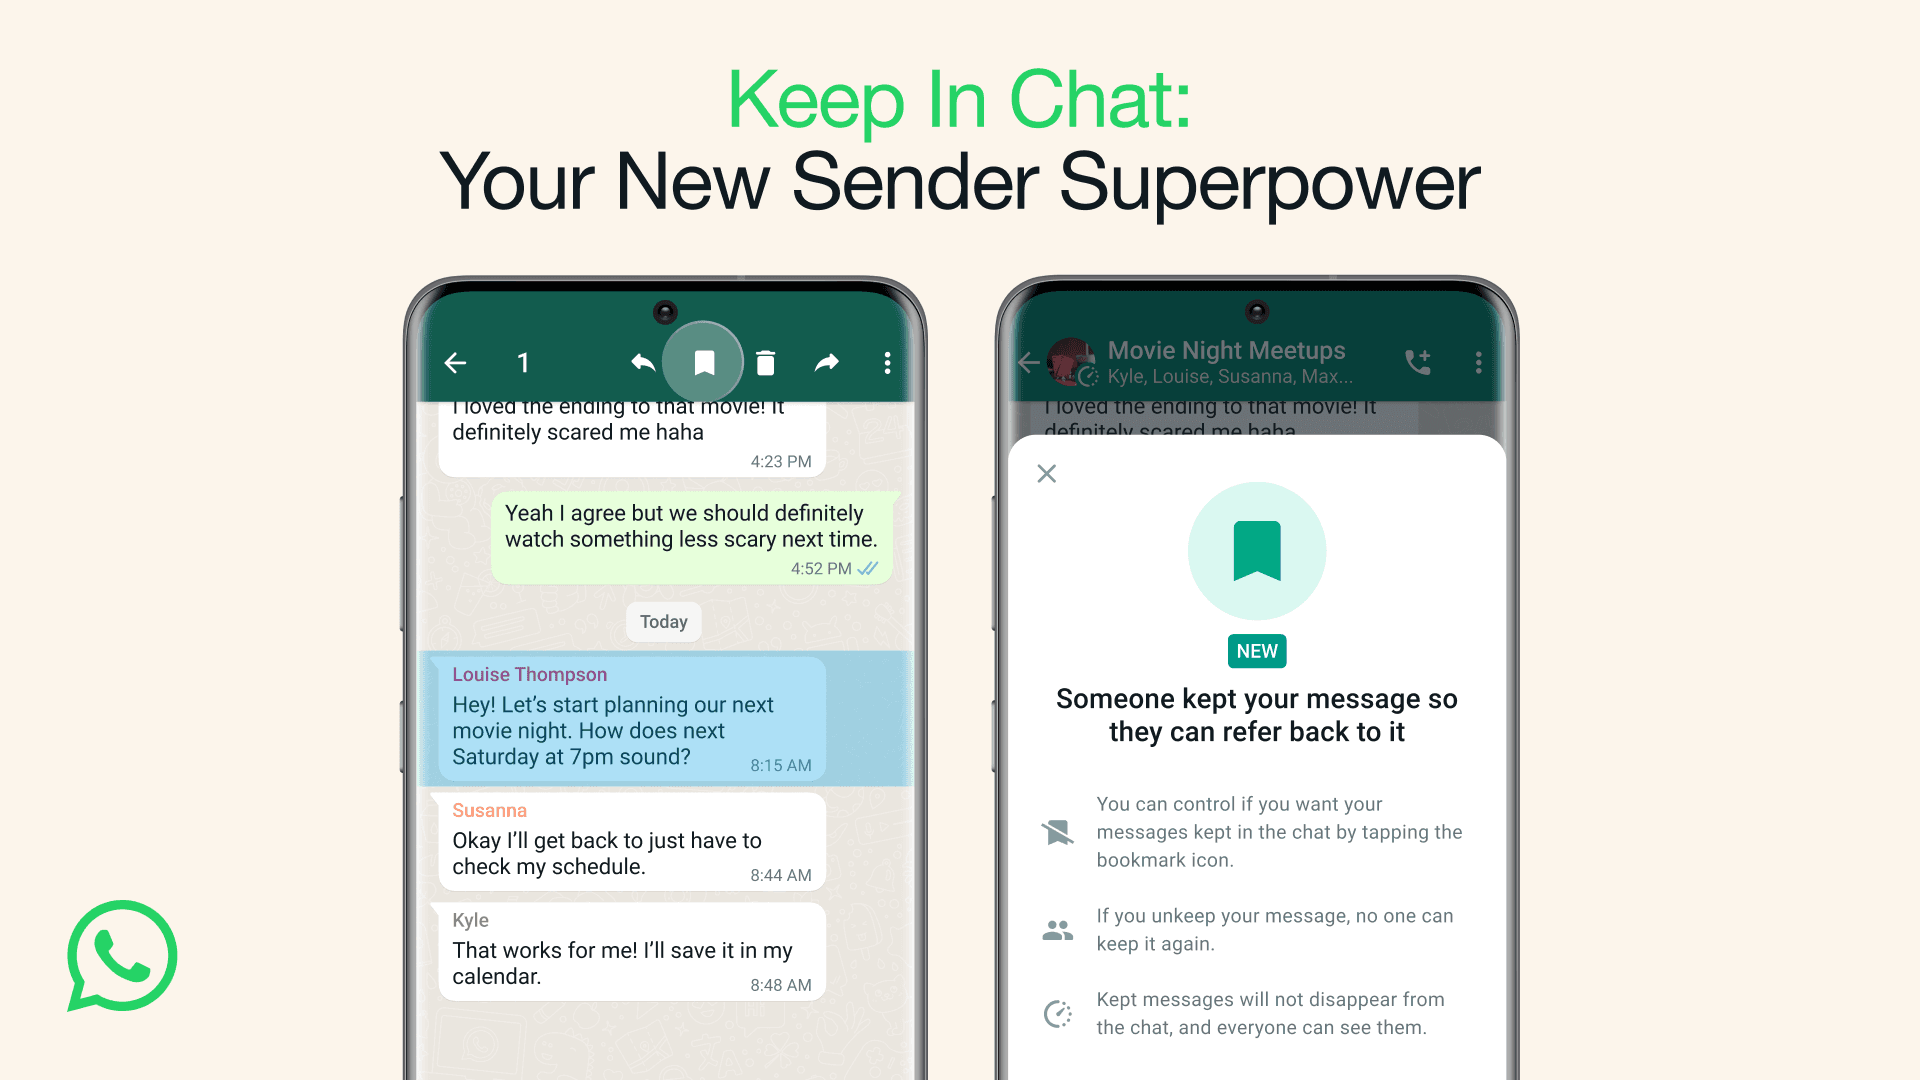 WhatsApp announced new 'Keep In Chat' feature